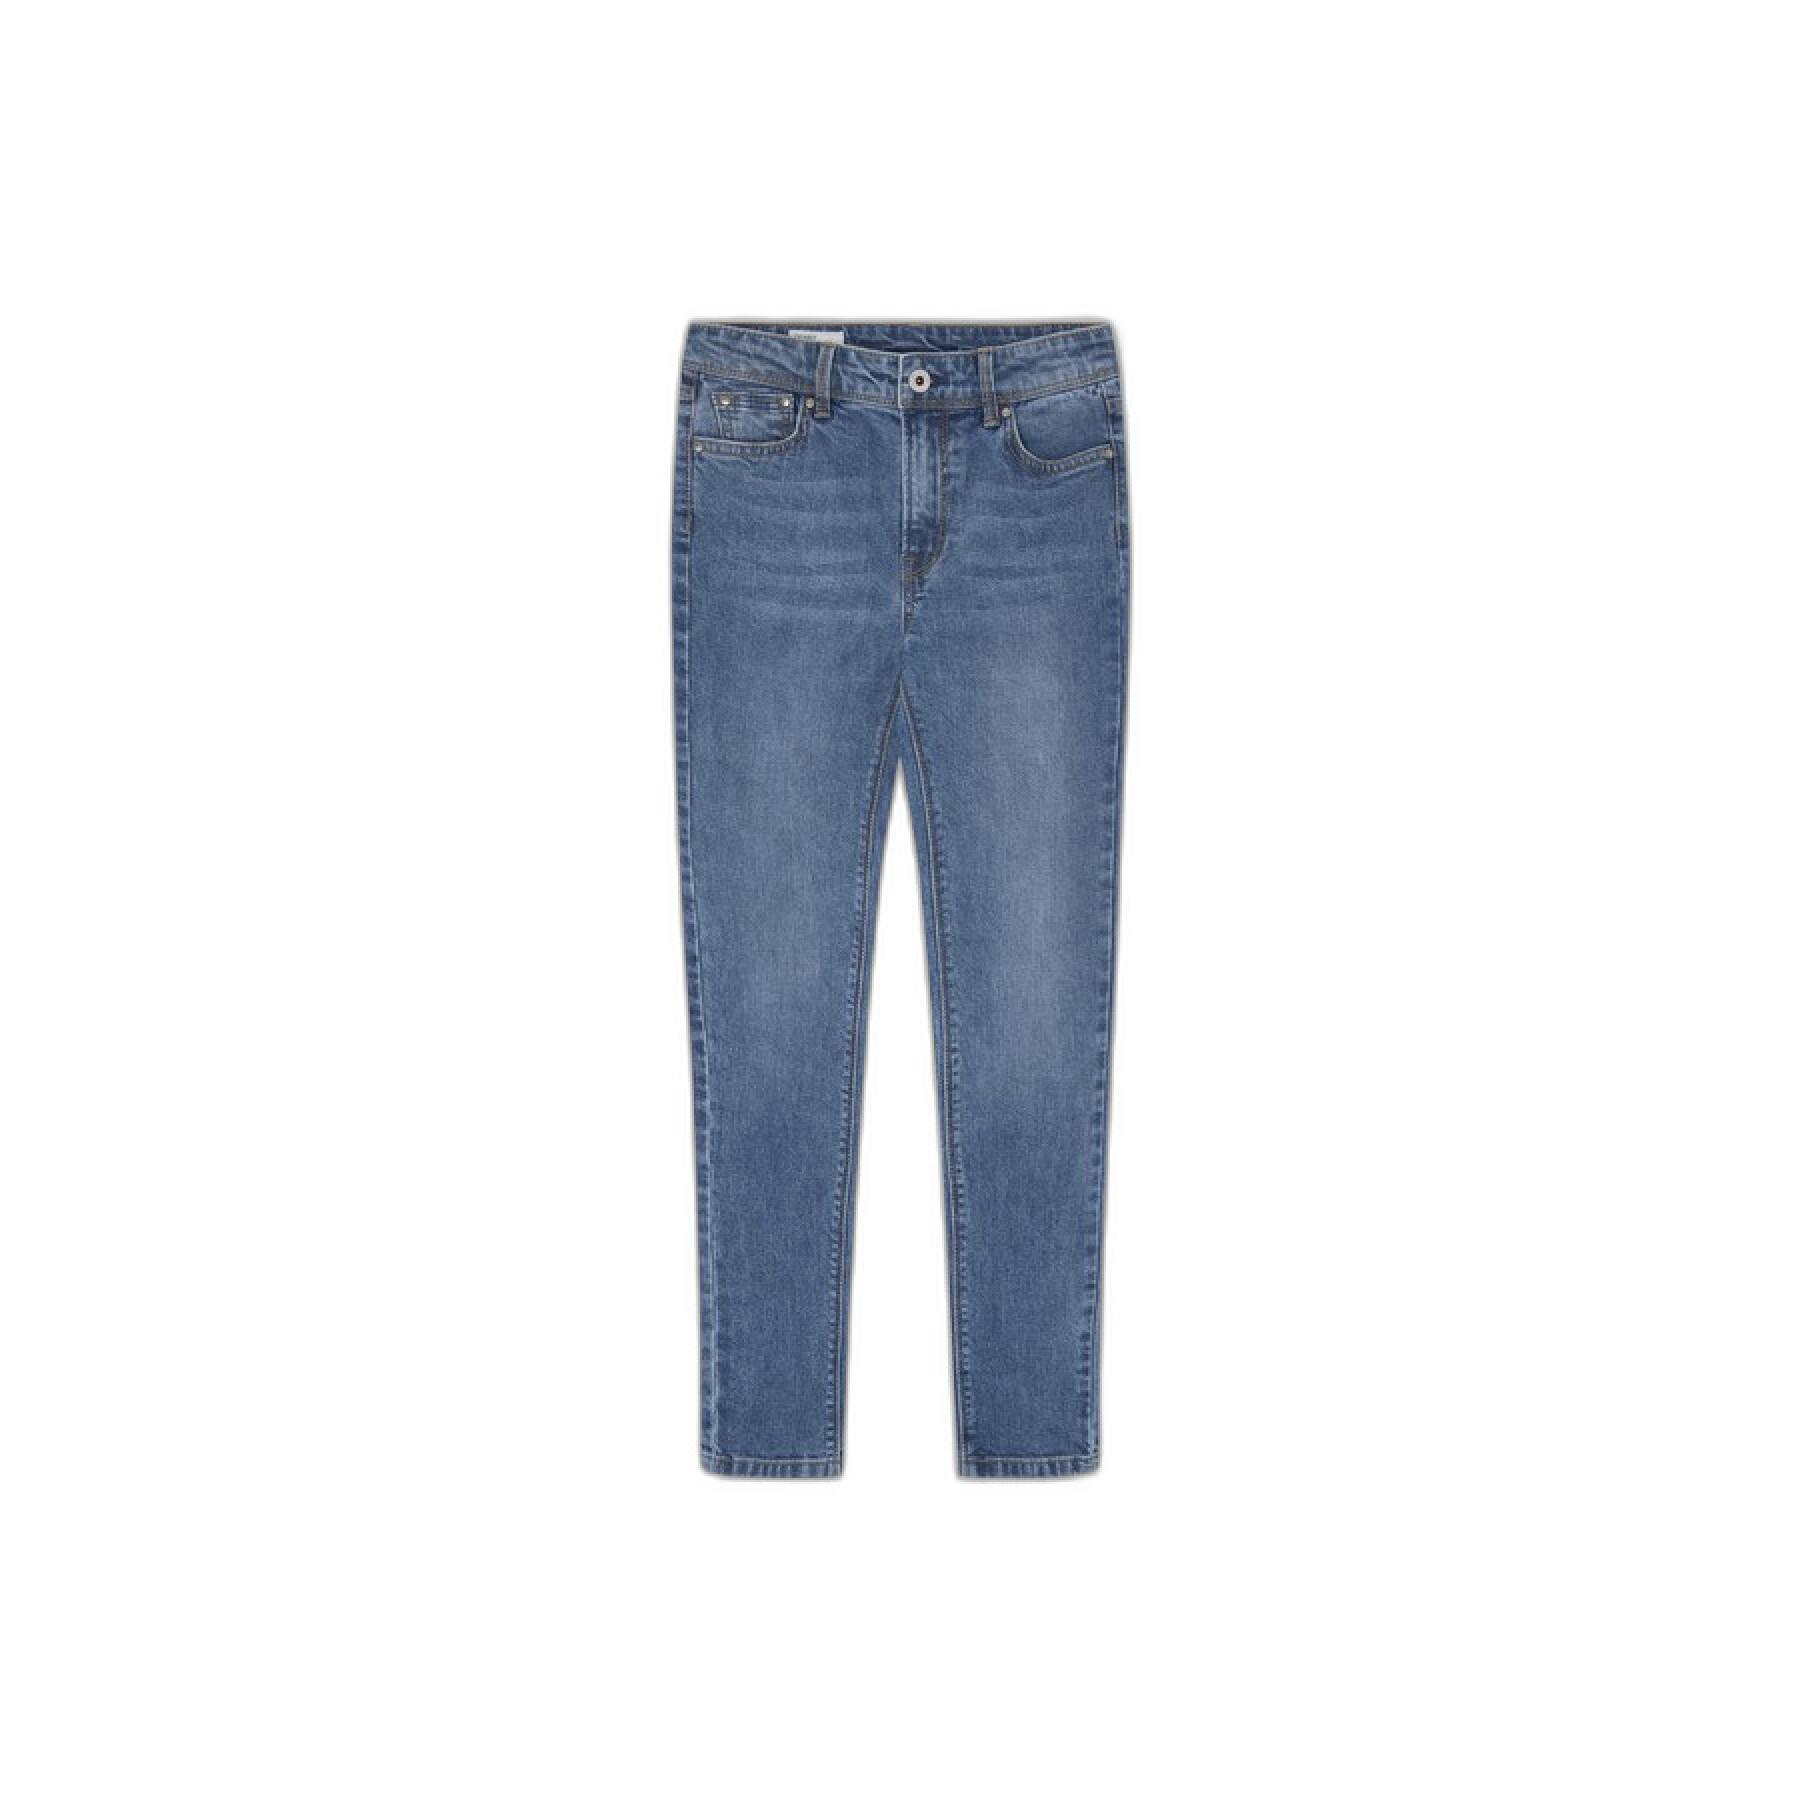 Girl's high jeans Pepe Jeans Pixlette